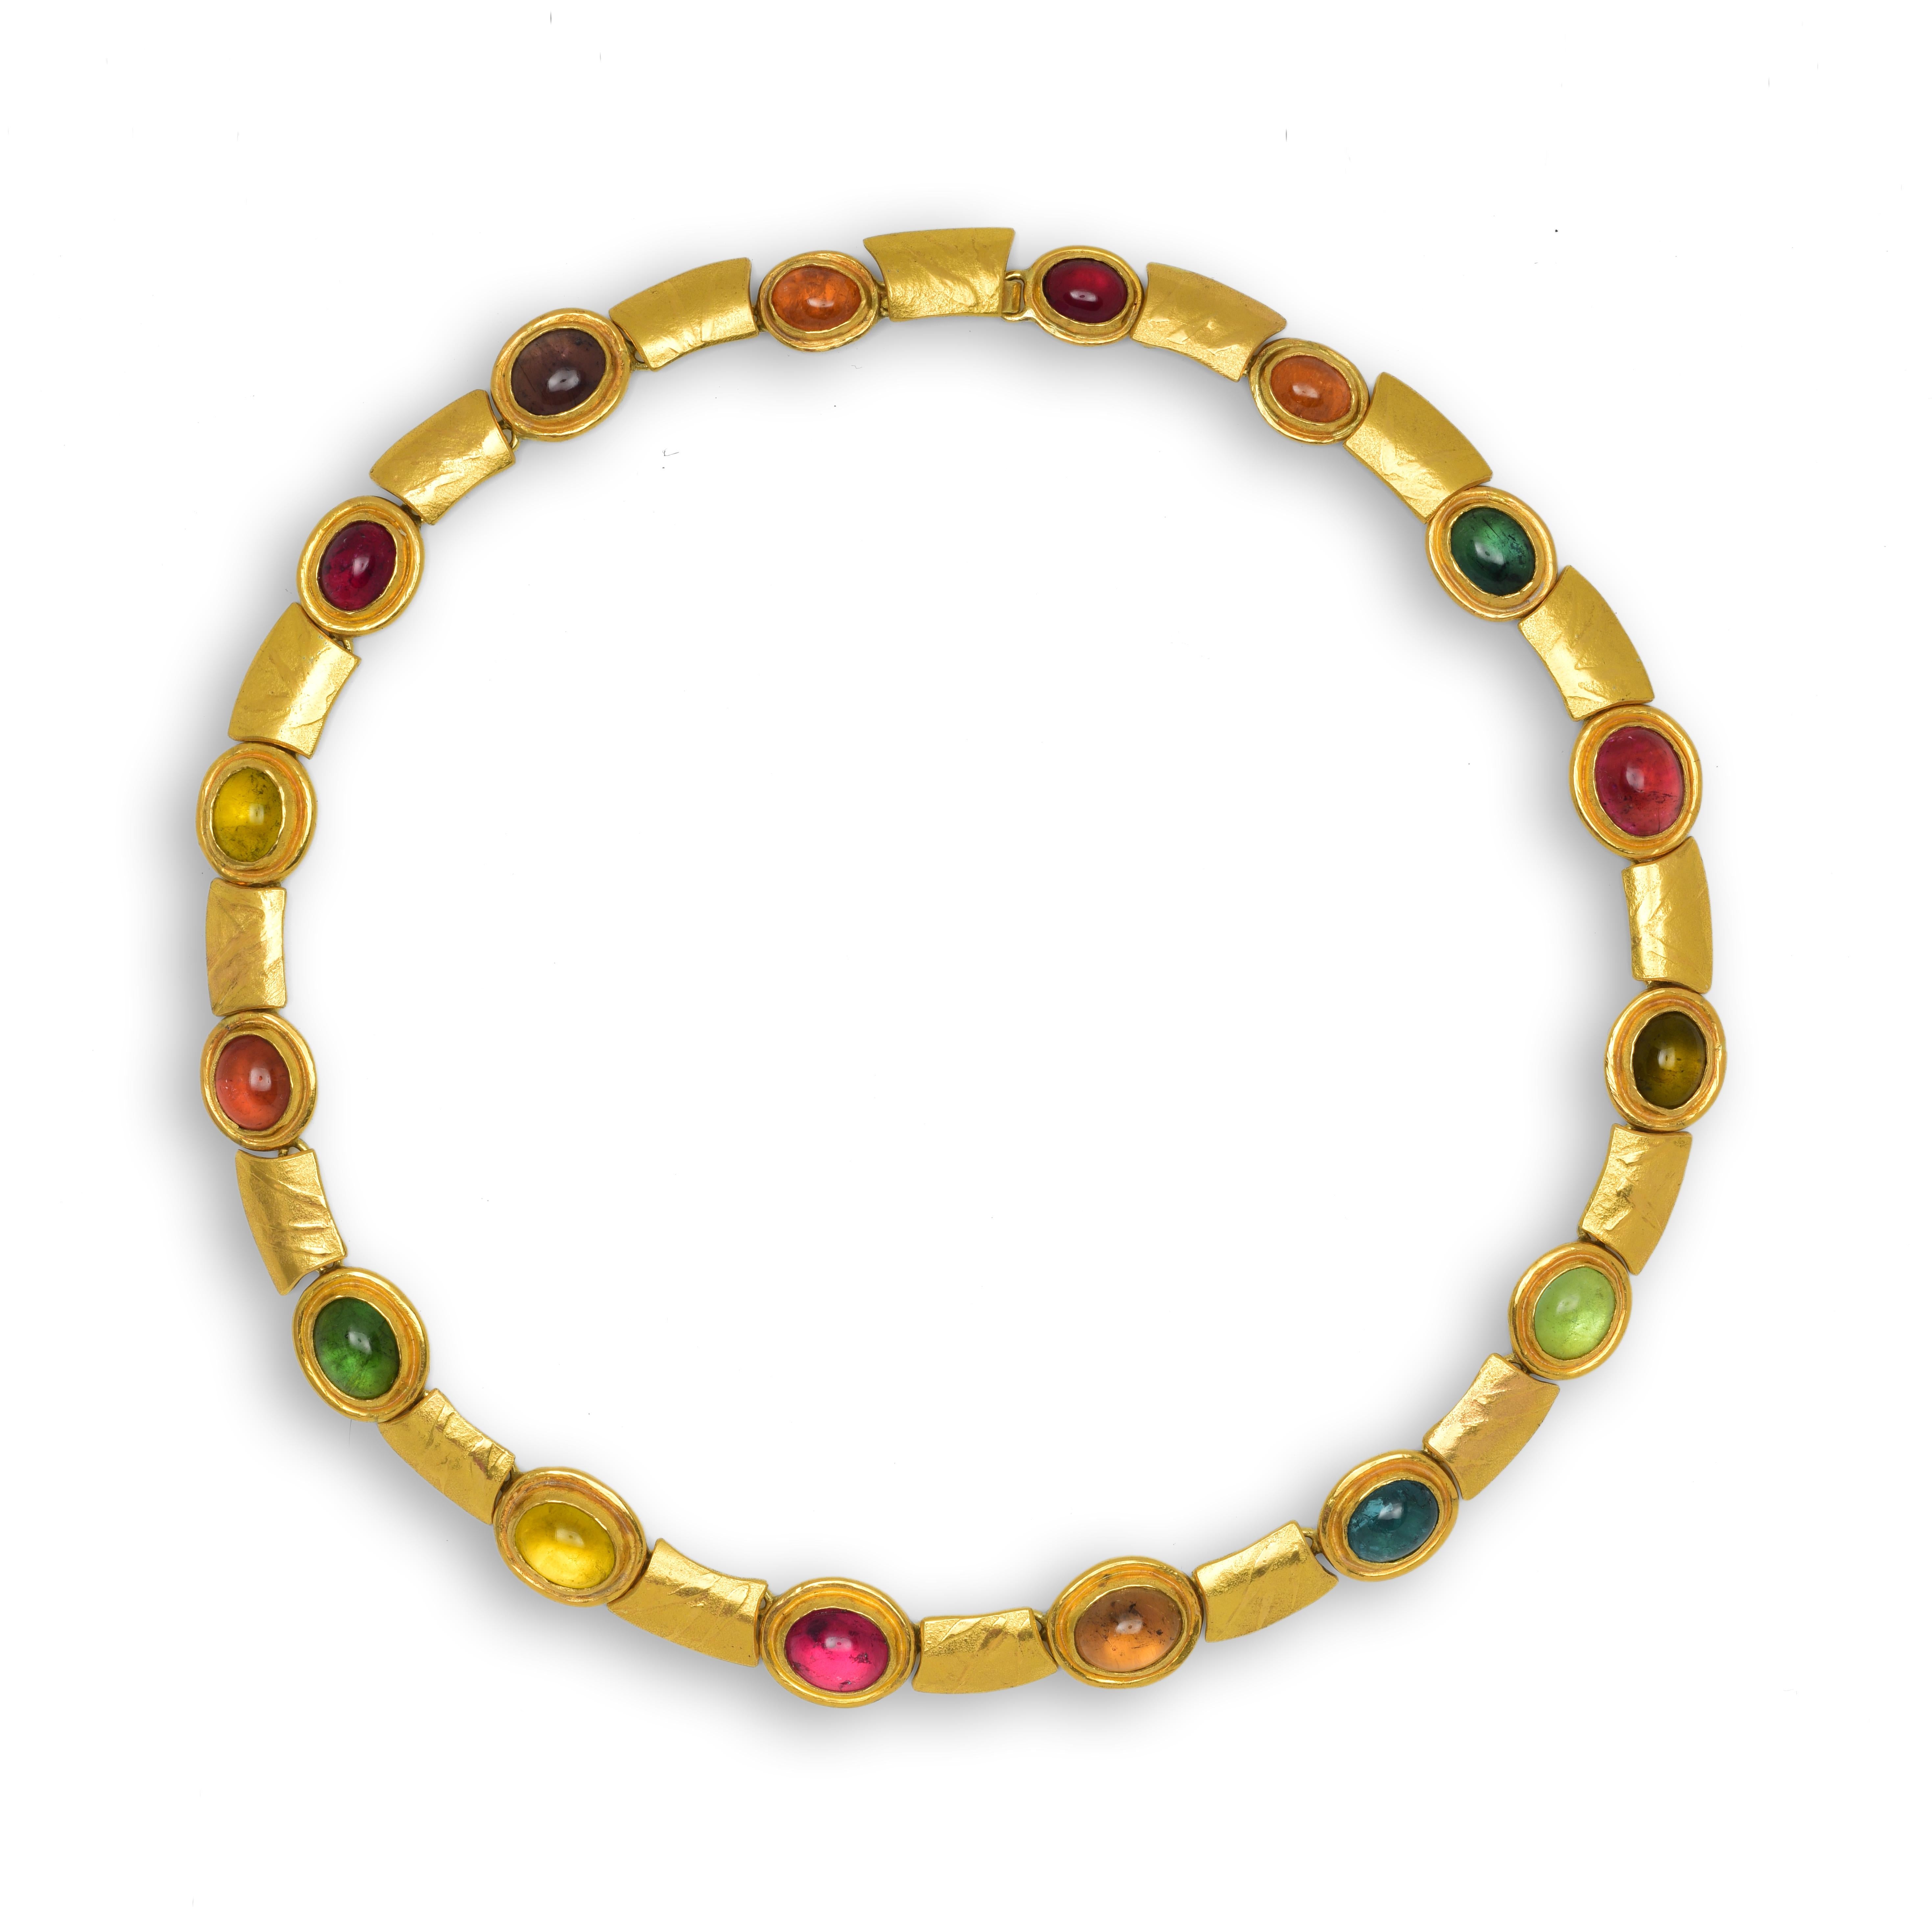 An organic yet striking necklace which is constructed of solid yellow gold and multicoloured tourmalines. It easily flows around the neck with a staggering total of 66 grams of 22 karat and 18 karat gold. The tourmaline stones are bright and clear,